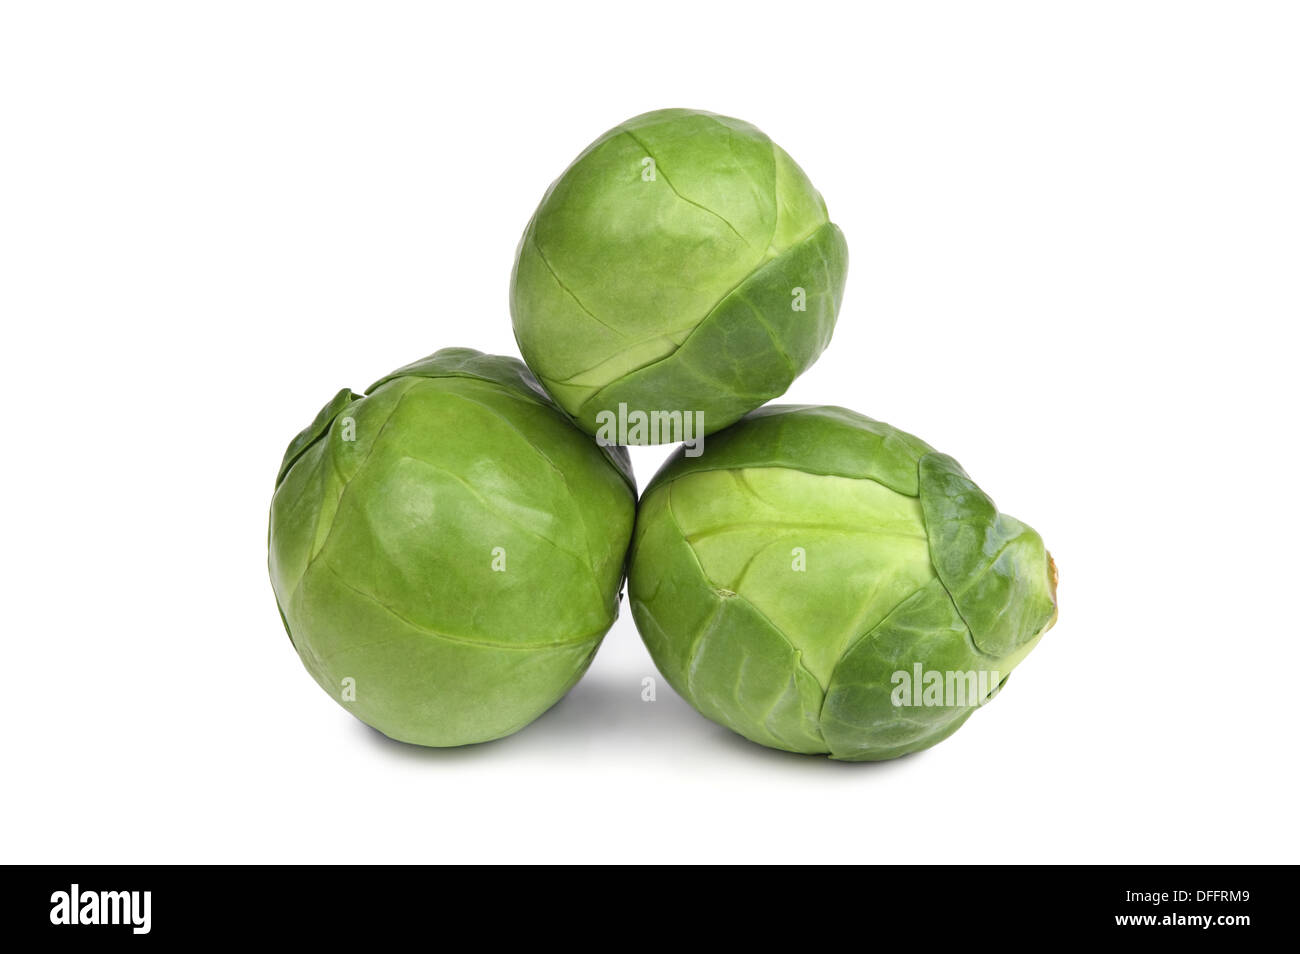 Ripe Green brussel sprouts isolated on white background Stock Photo